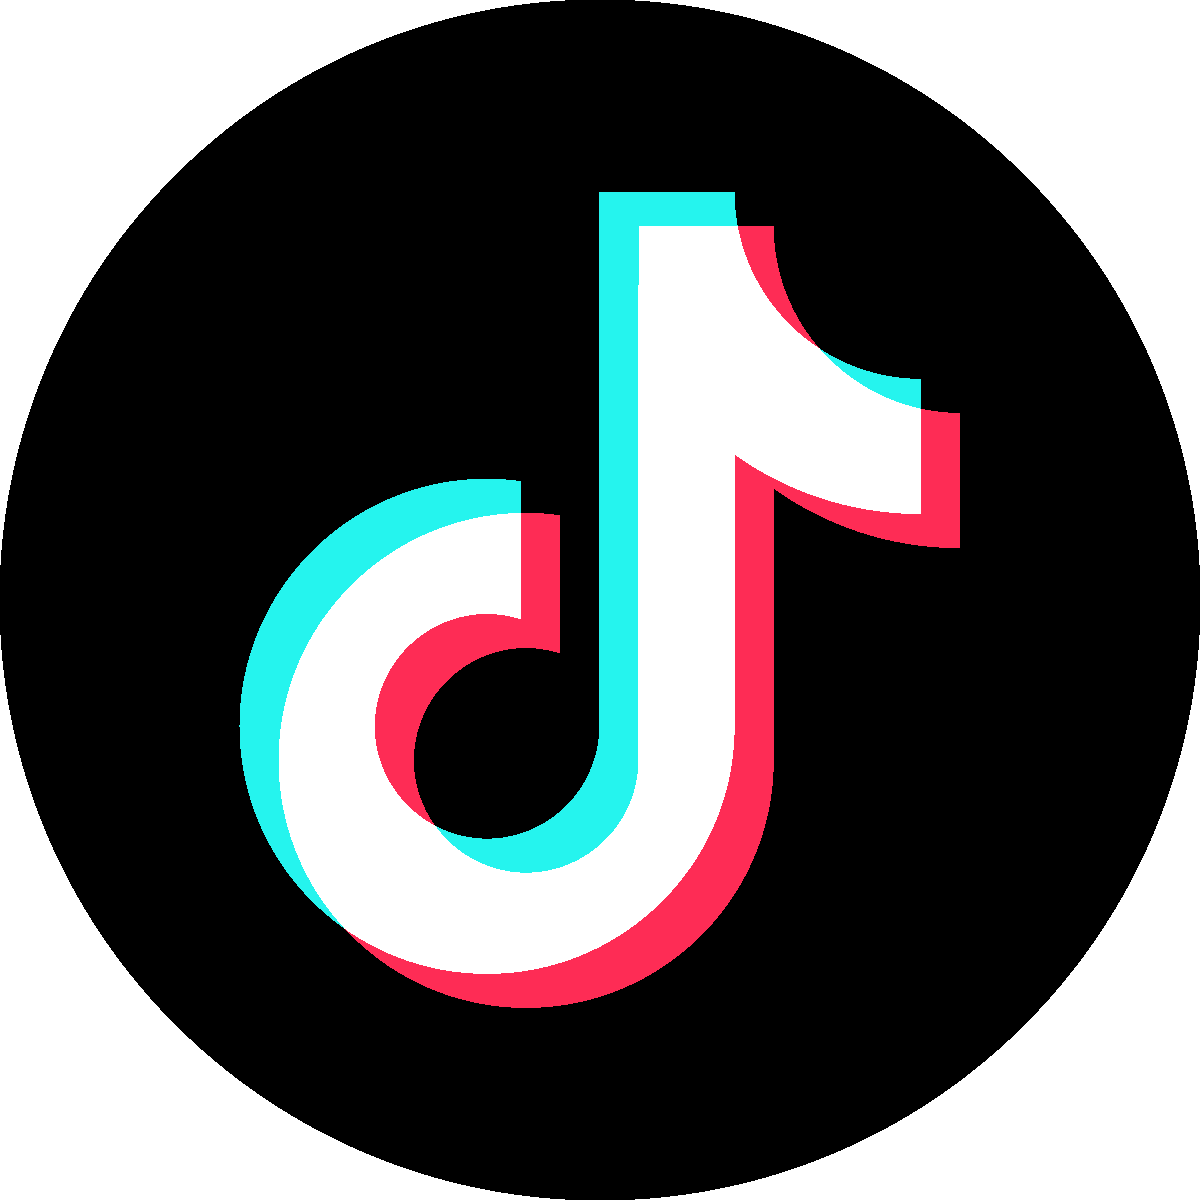 Perot Museum of Nature and Science TikTok page.